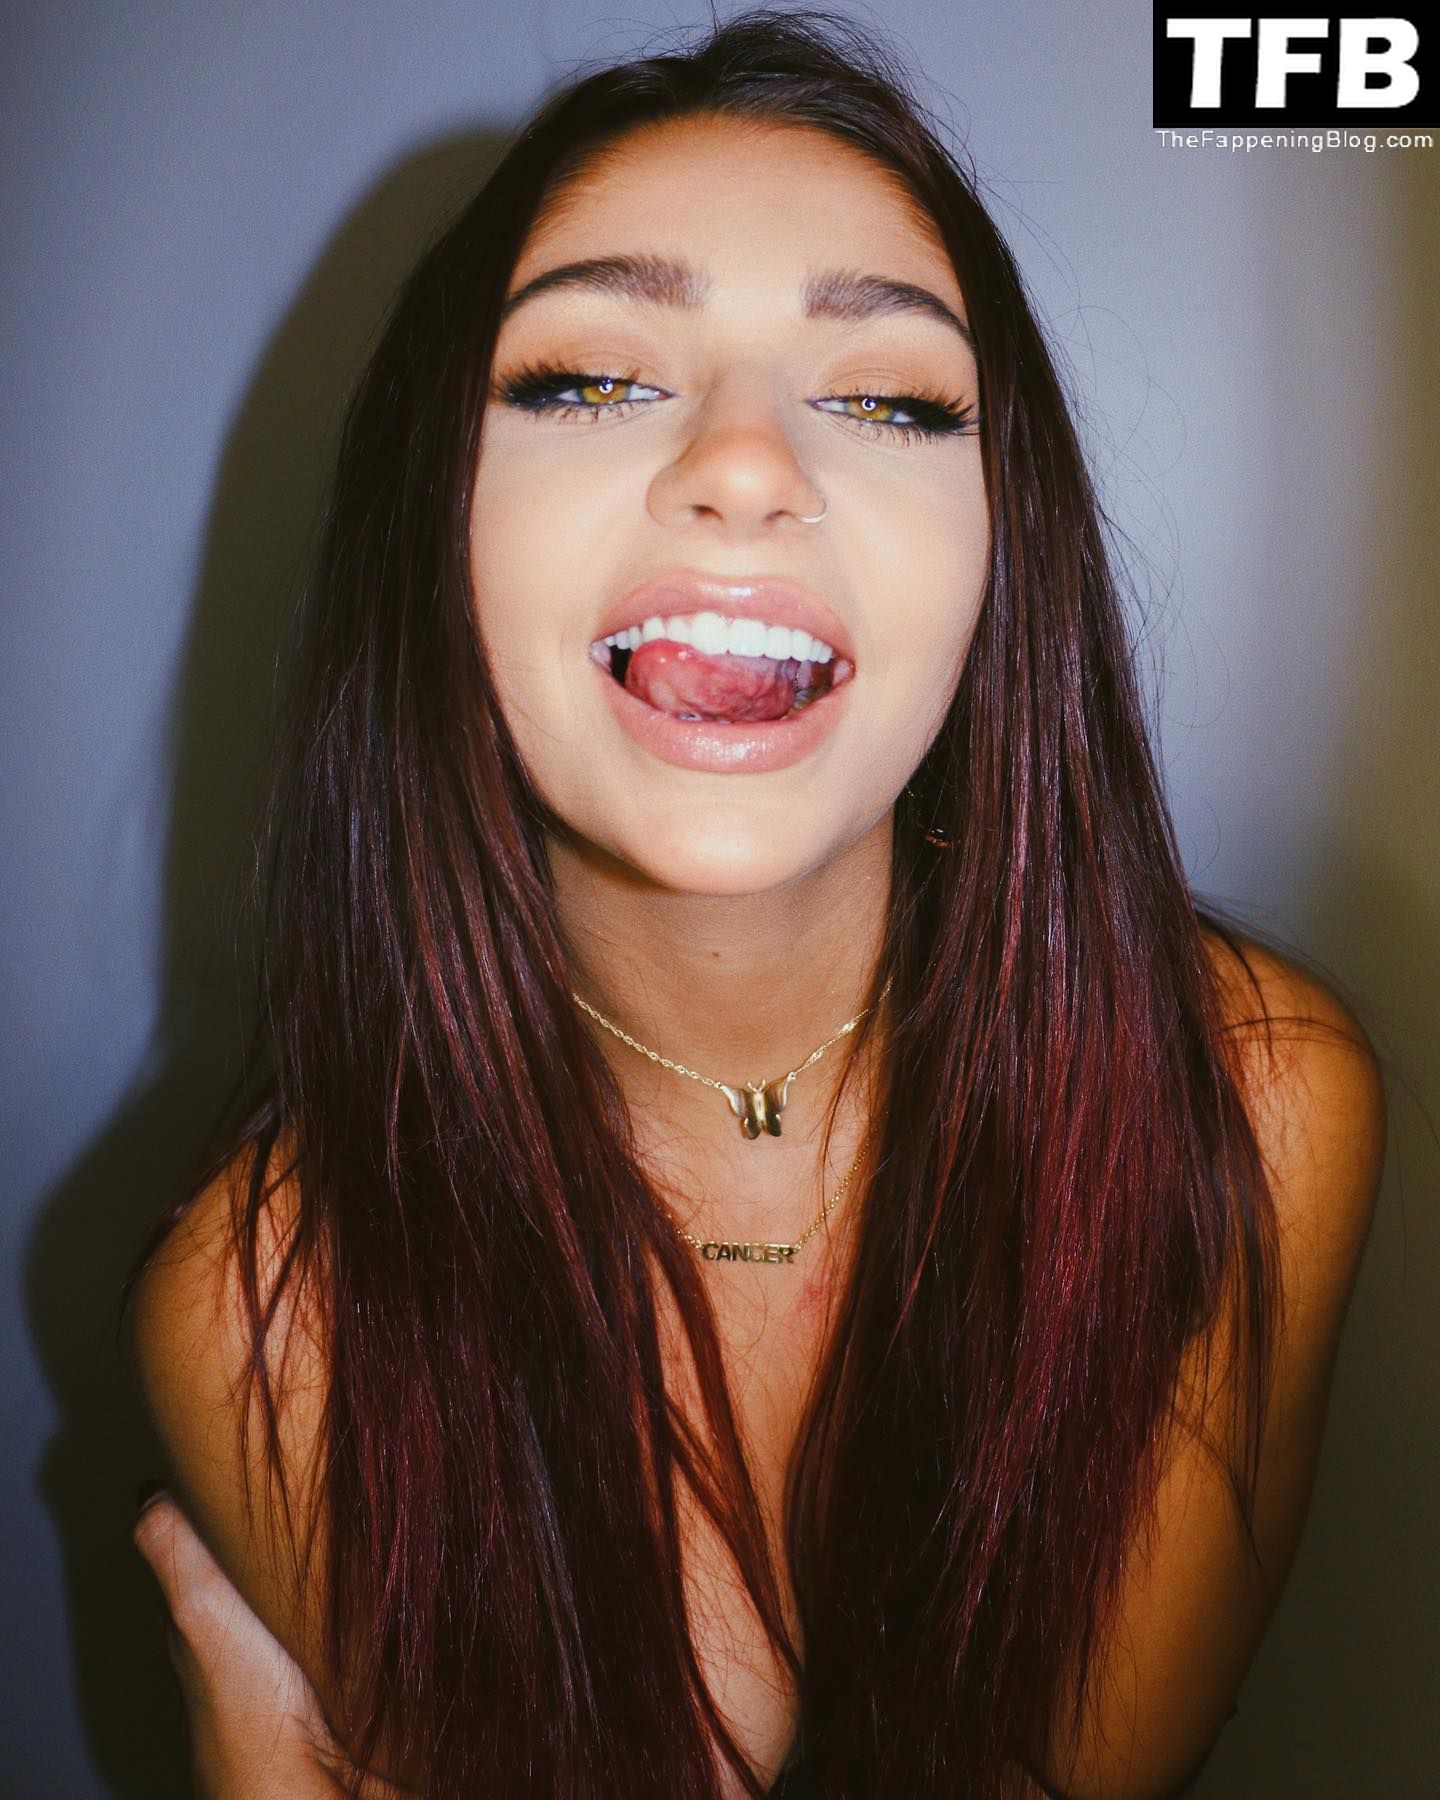 Check out Andrea Russett’s topless and sexy photos from events and her soci...